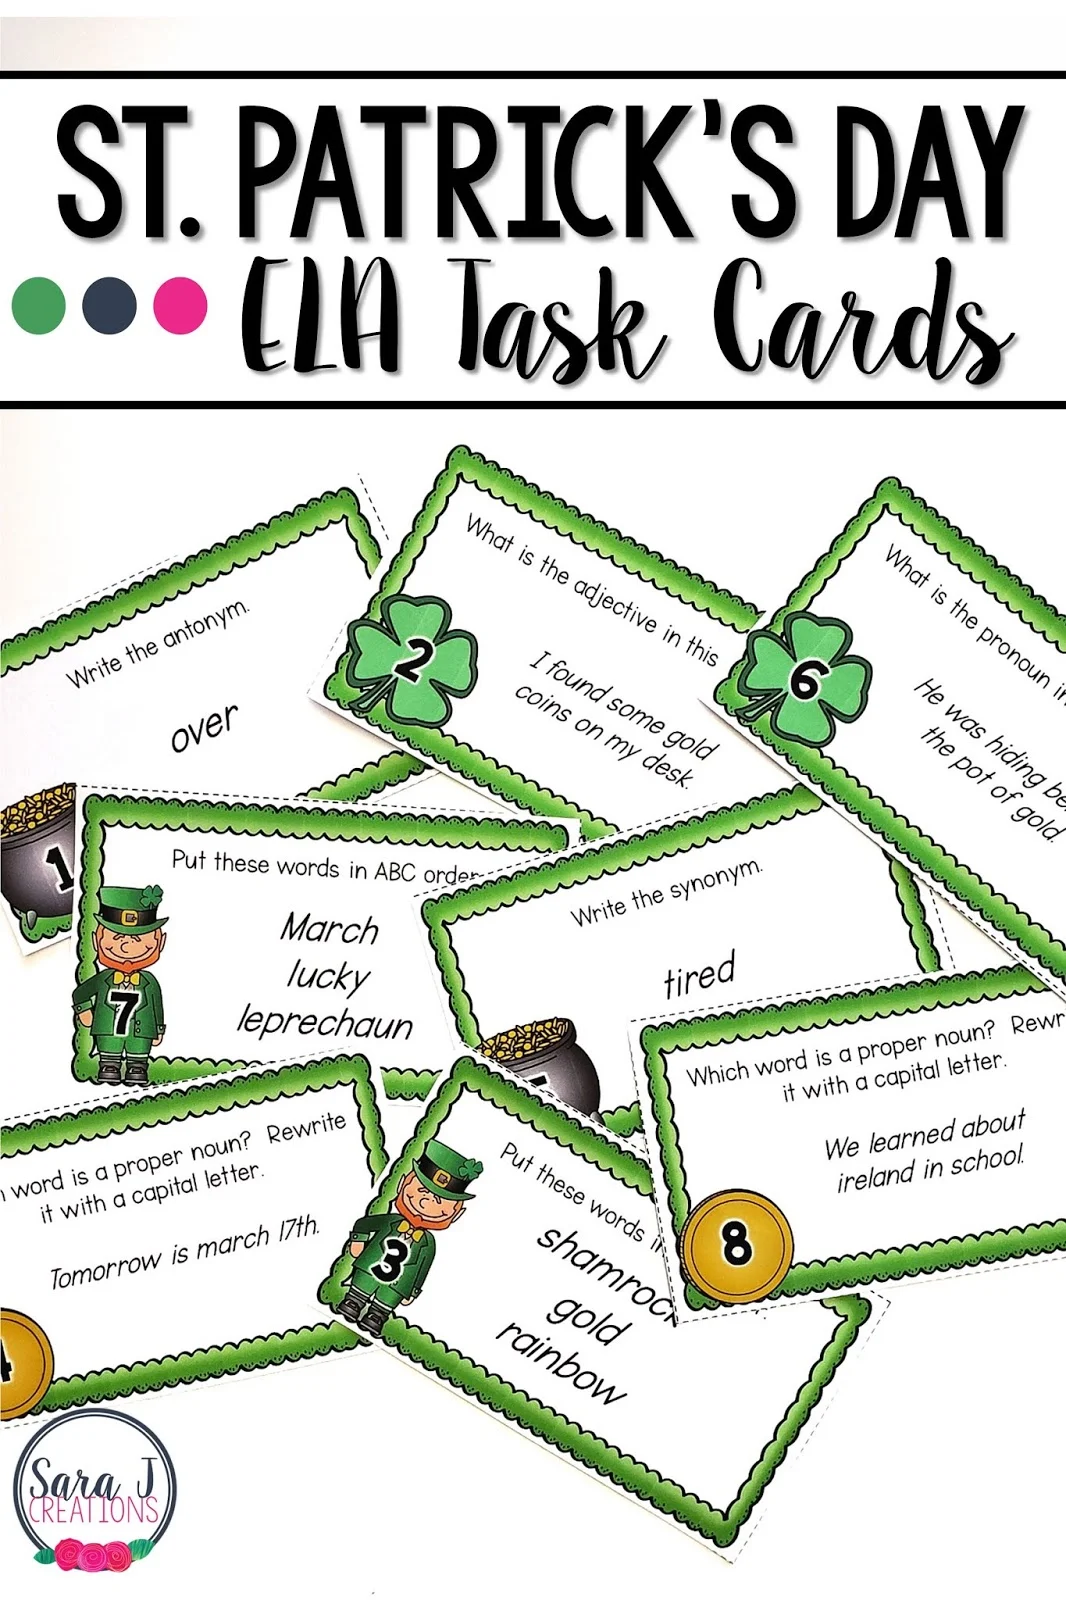 ELA Task Cards with a St. Patrick's Day theme are the perfect way to practice parts of speech, synonyms, antonyms, and alphabetical order. These 32 task cards make an awesome review for your language arts block. Ideal for literacy practice for second grade but could also be used with first or third graders or in special education.